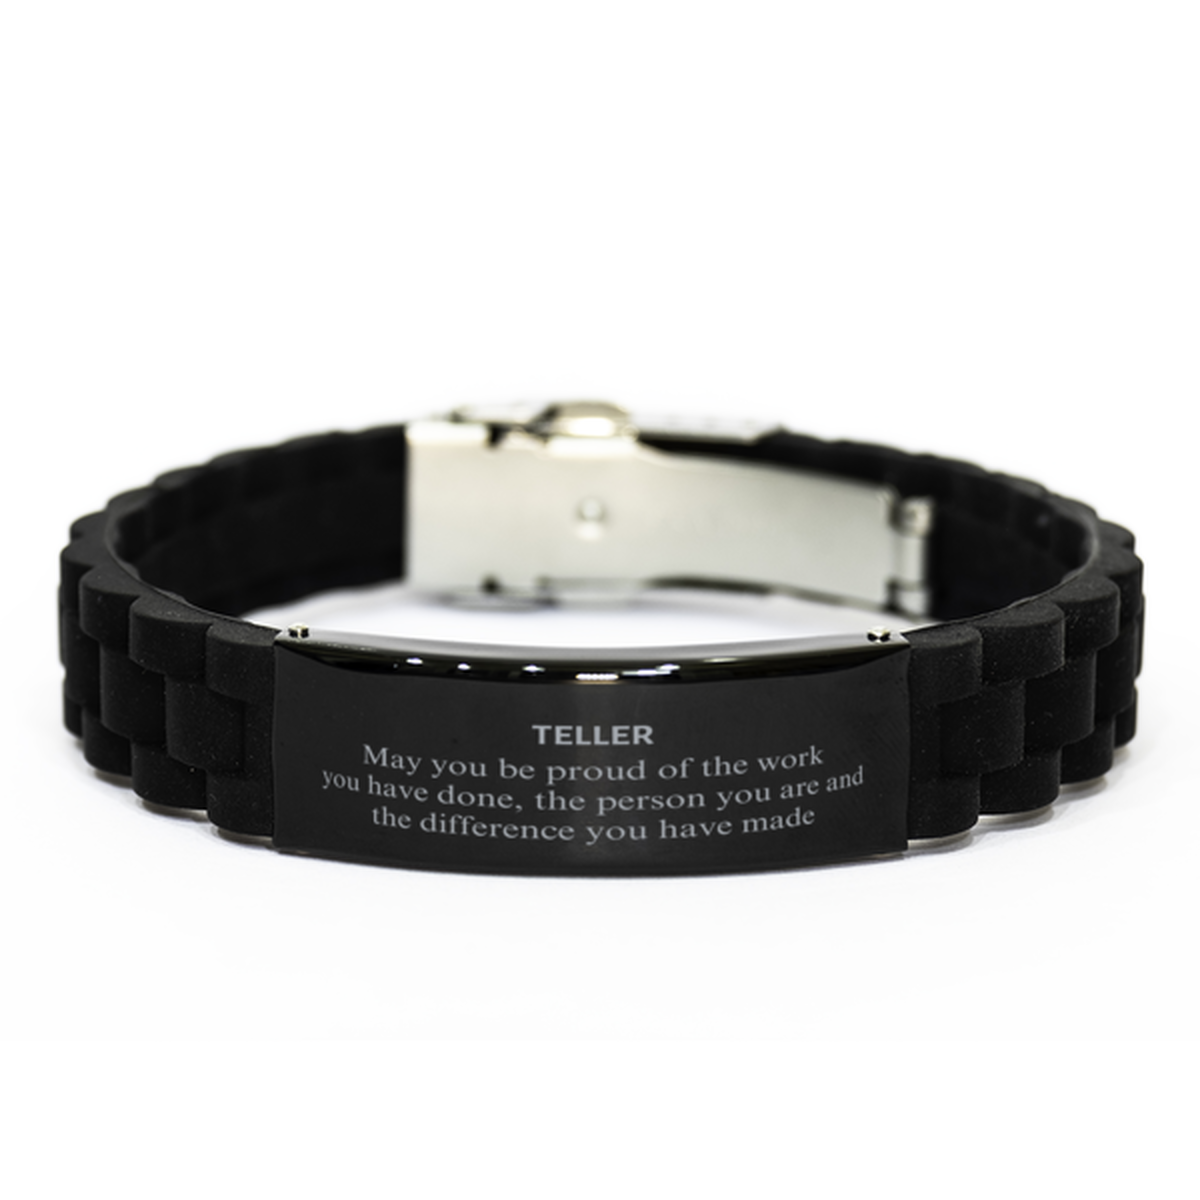 Teller May you be proud of the work you have done, Retirement Teller Black Glidelock Clasp Bracelet for Colleague Appreciation Gifts Amazing for Teller